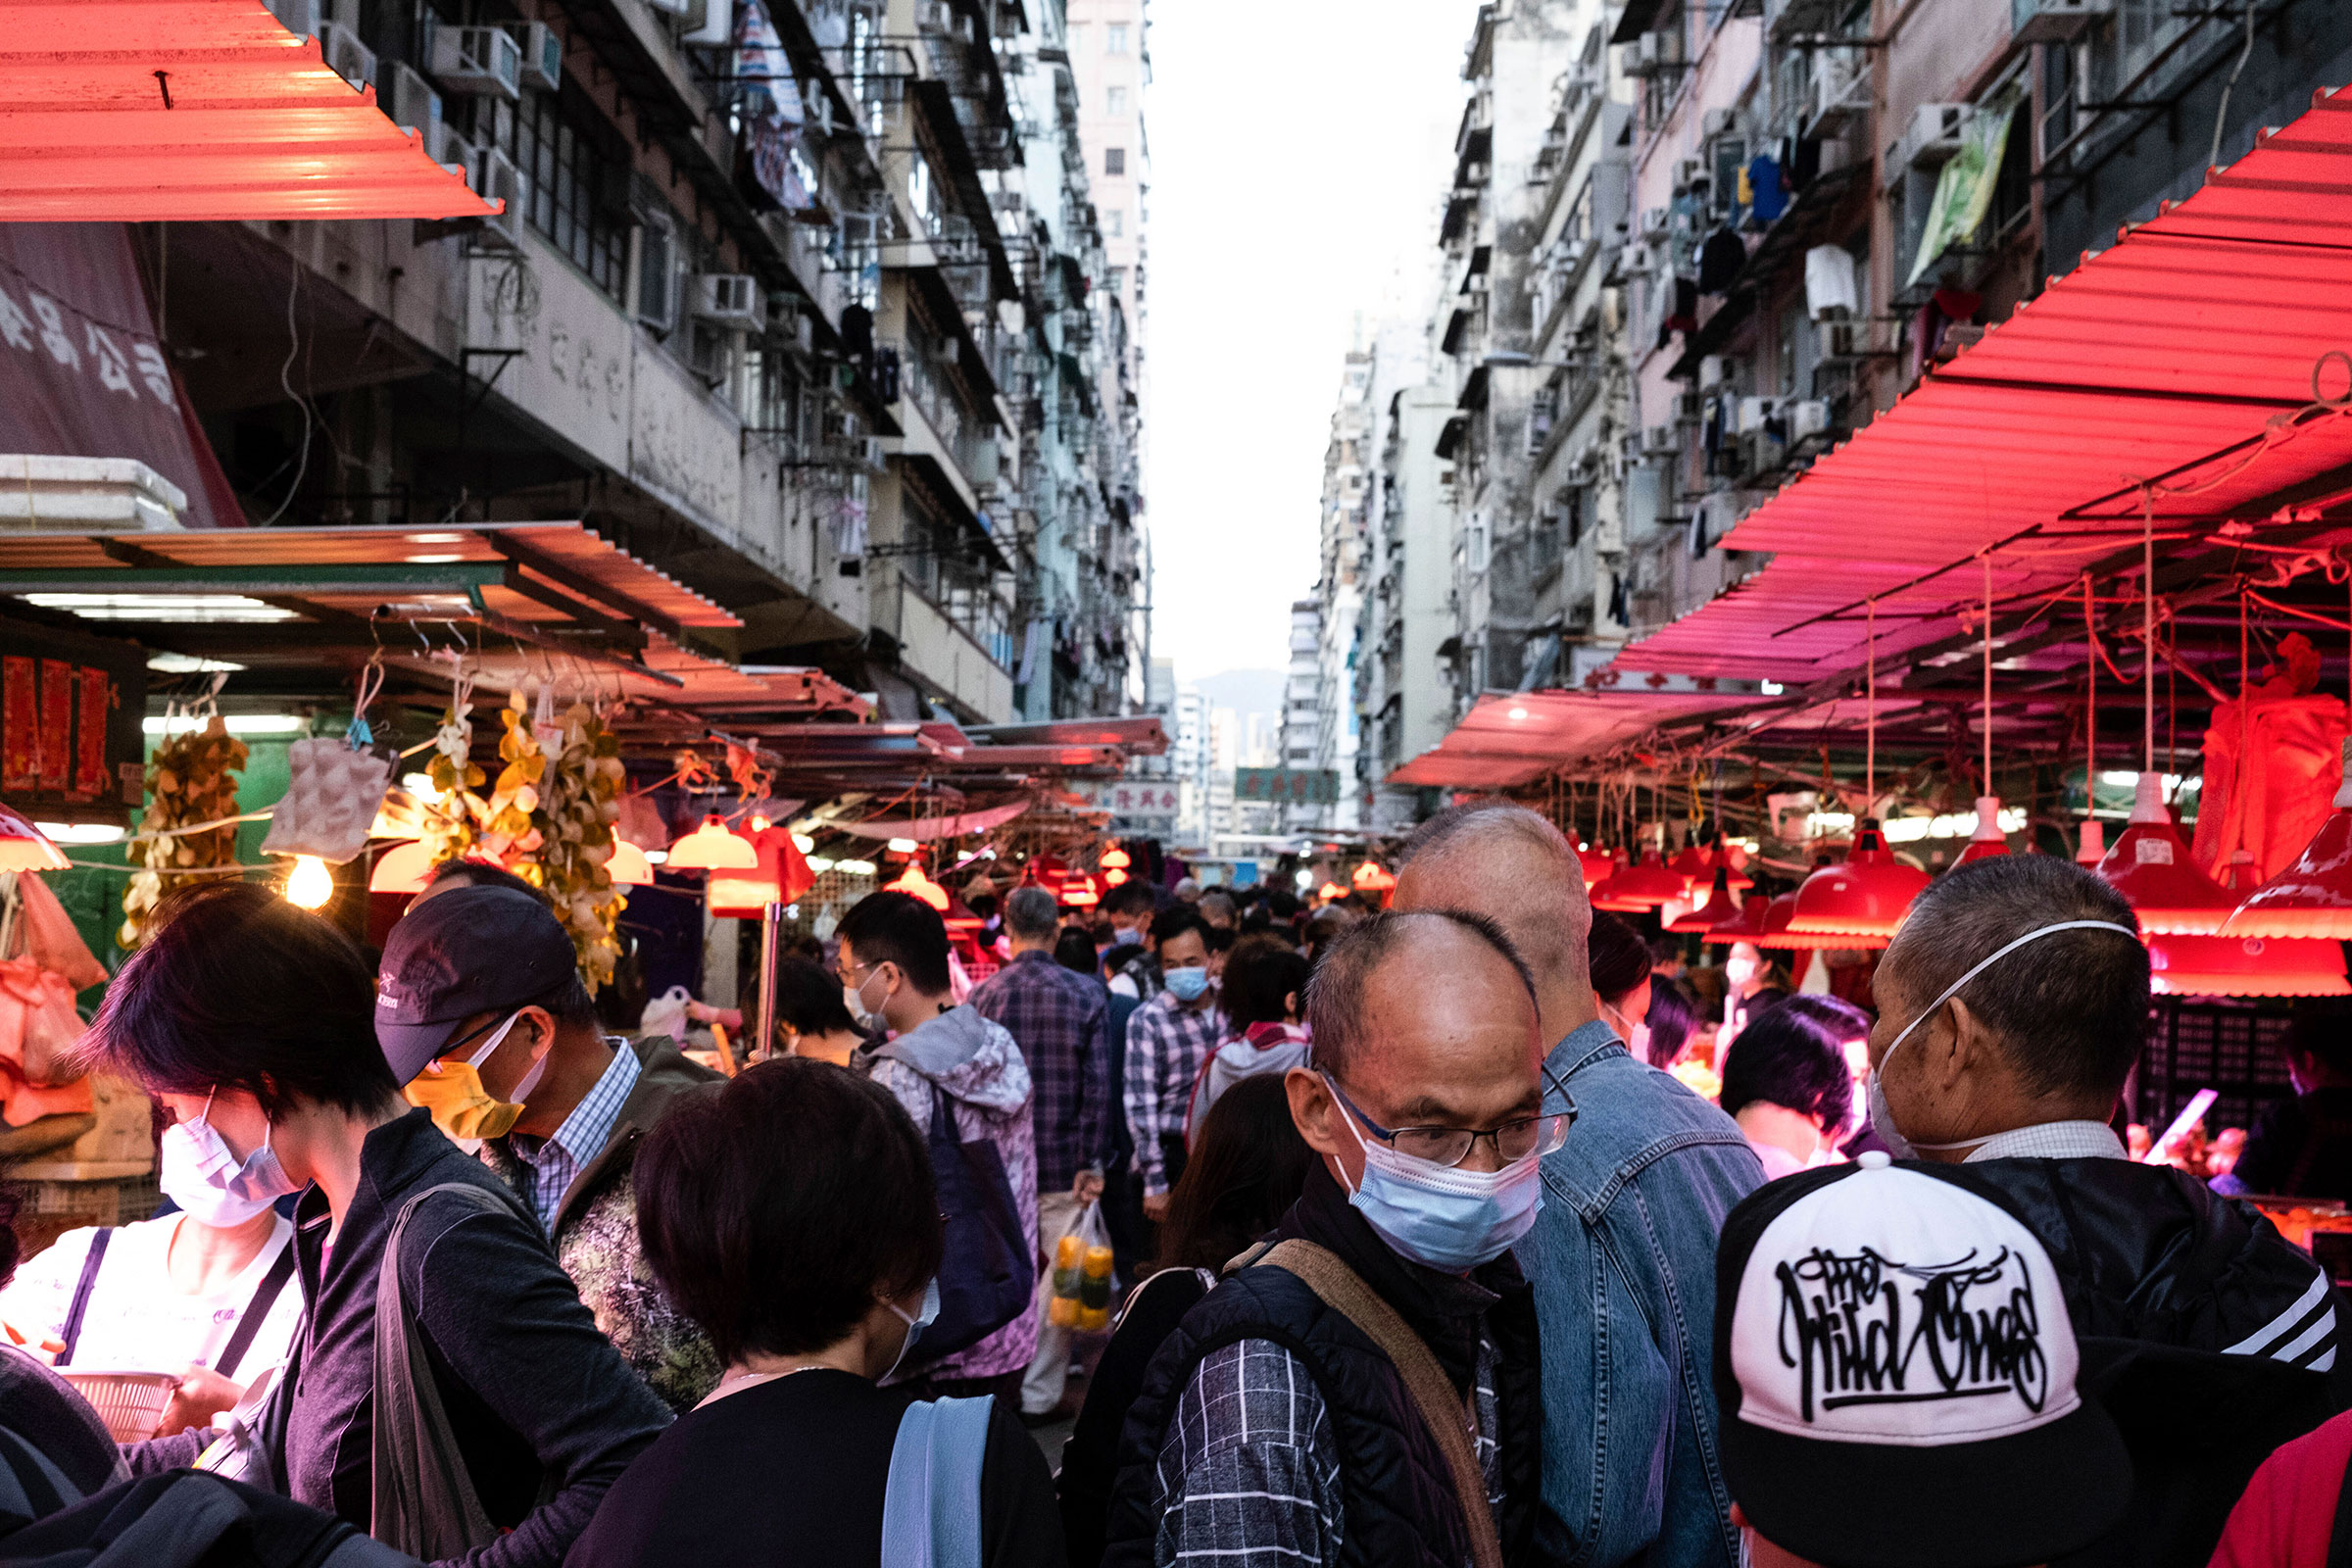 People shop at a crowed street market on December 3 in Hong Kong.